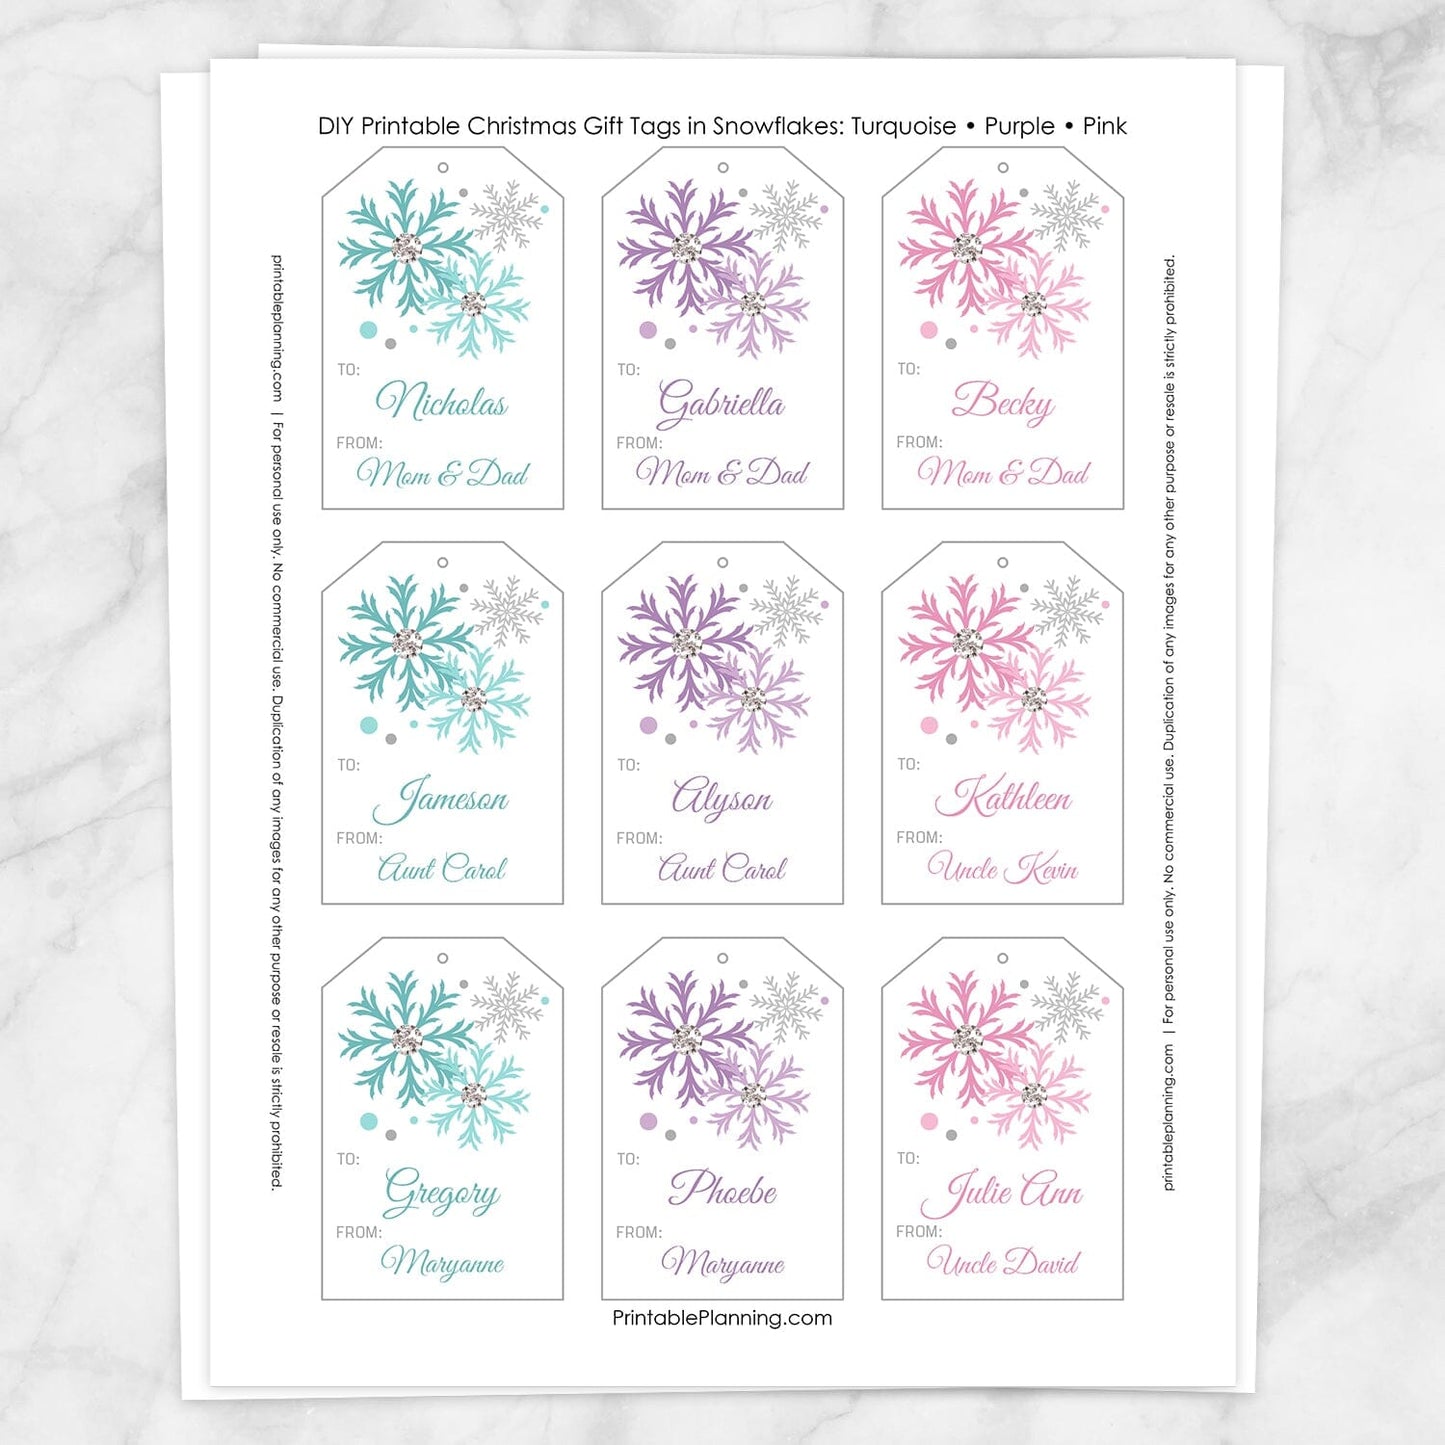 Printable Snowflake Personalized Gift Tags - Turquoise Purple Pink at Printable Planning. Sheet of 9 gift tags.